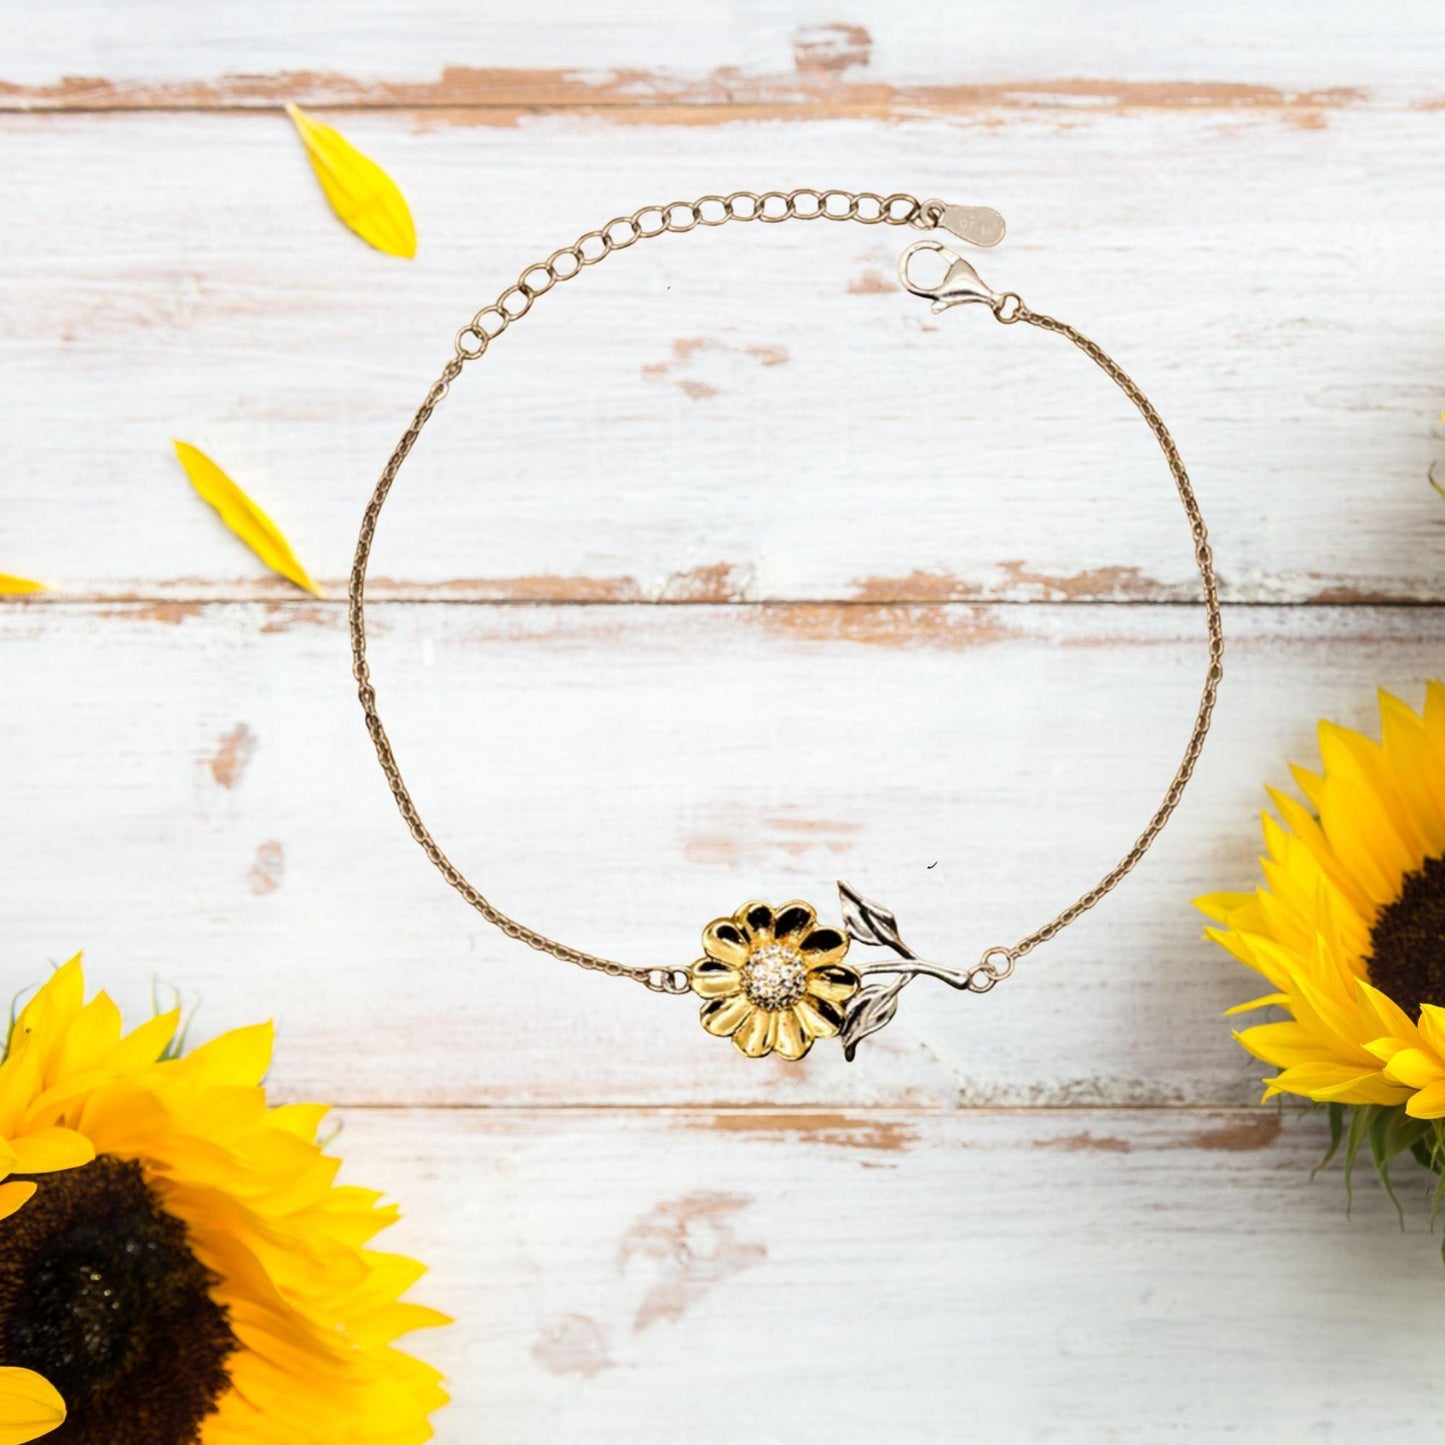 Mississippi is my home Gifts, Lovely Mississippi Birthday Christmas Sunflower Bracelet For People from Mississippi, Men, Women, Friends - Mallard Moon Gift Shop